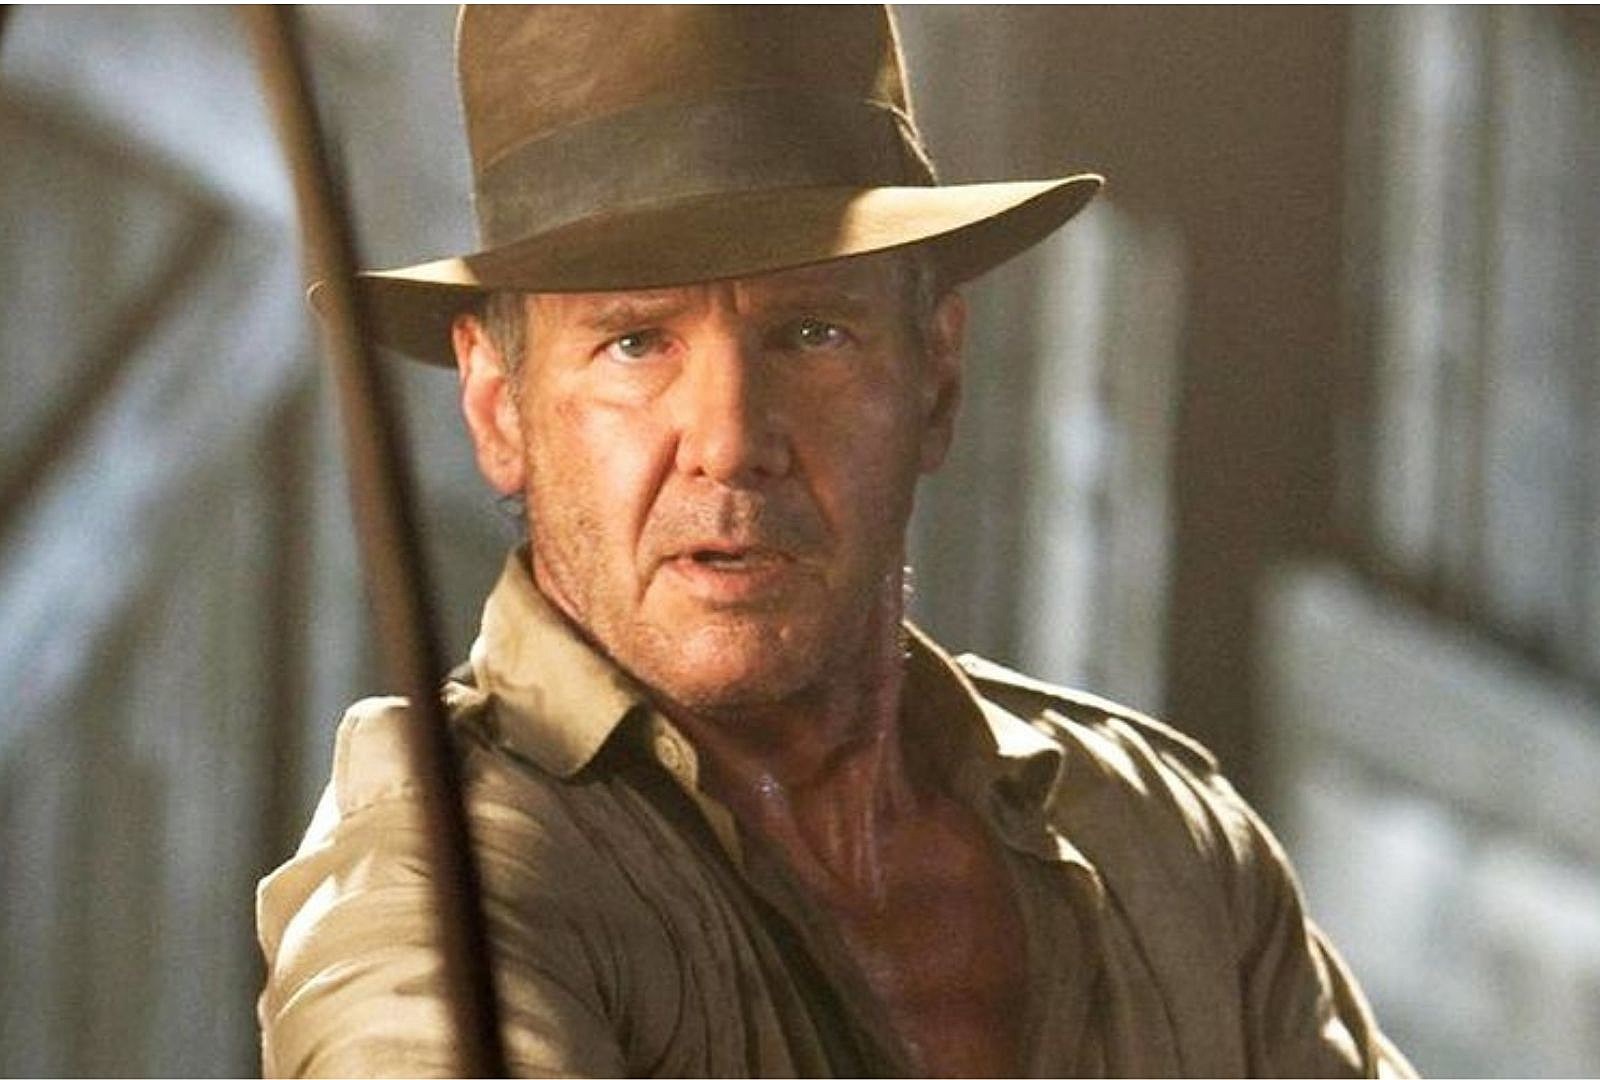 Indiana Jones 5' Release Date Pushed Back a Full Year